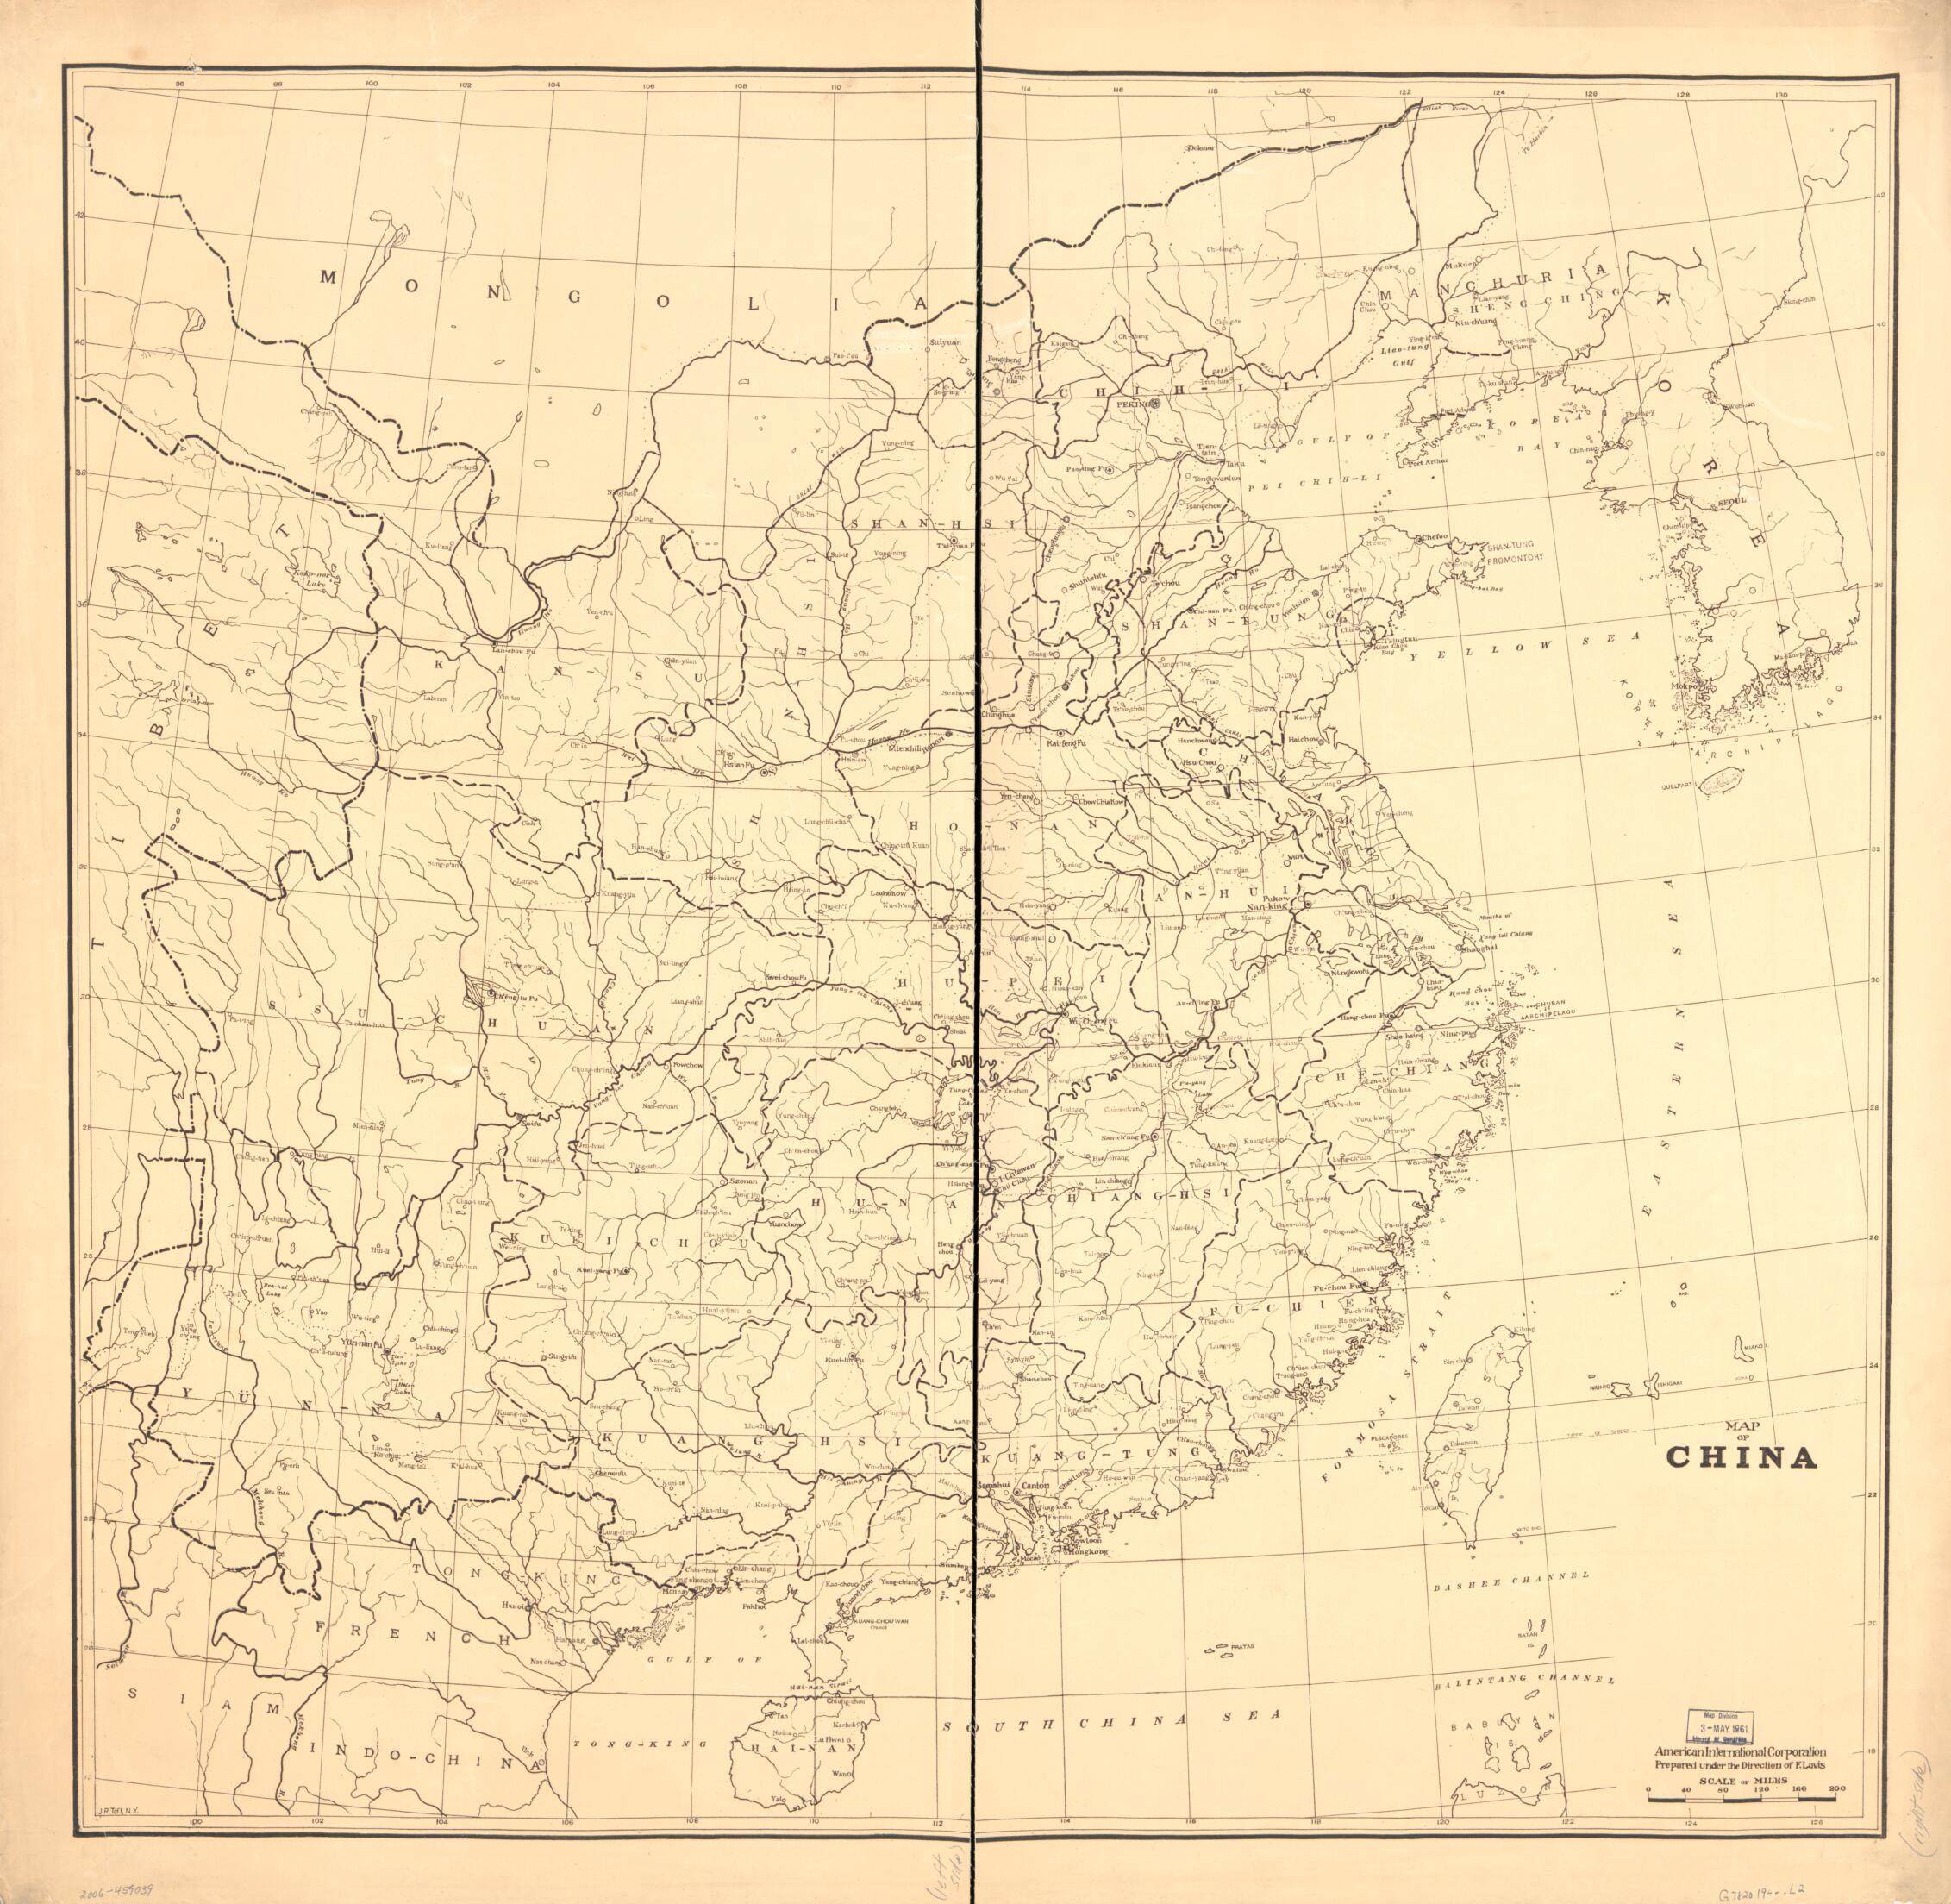 This old map of Map of China from 1900 was created by F. Lavis in 1900